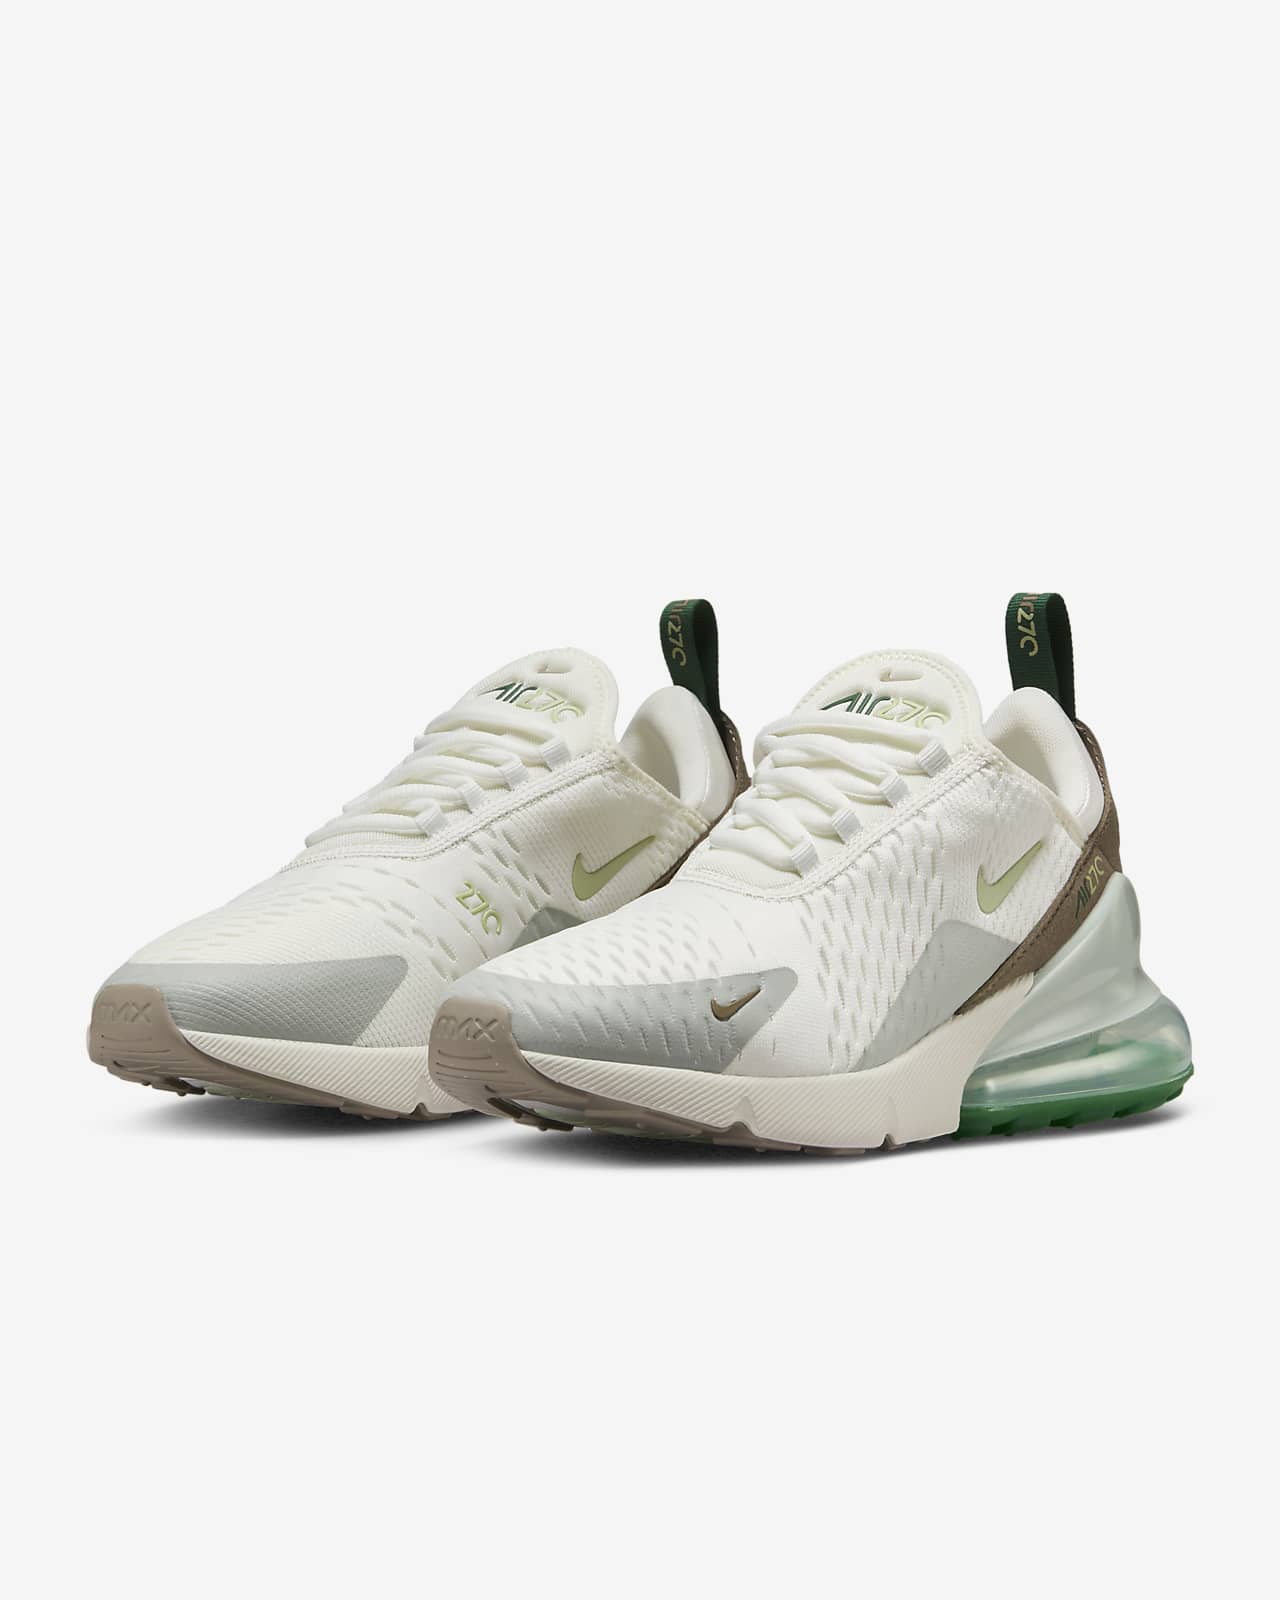 size 7 women's nike air max 270 shoes